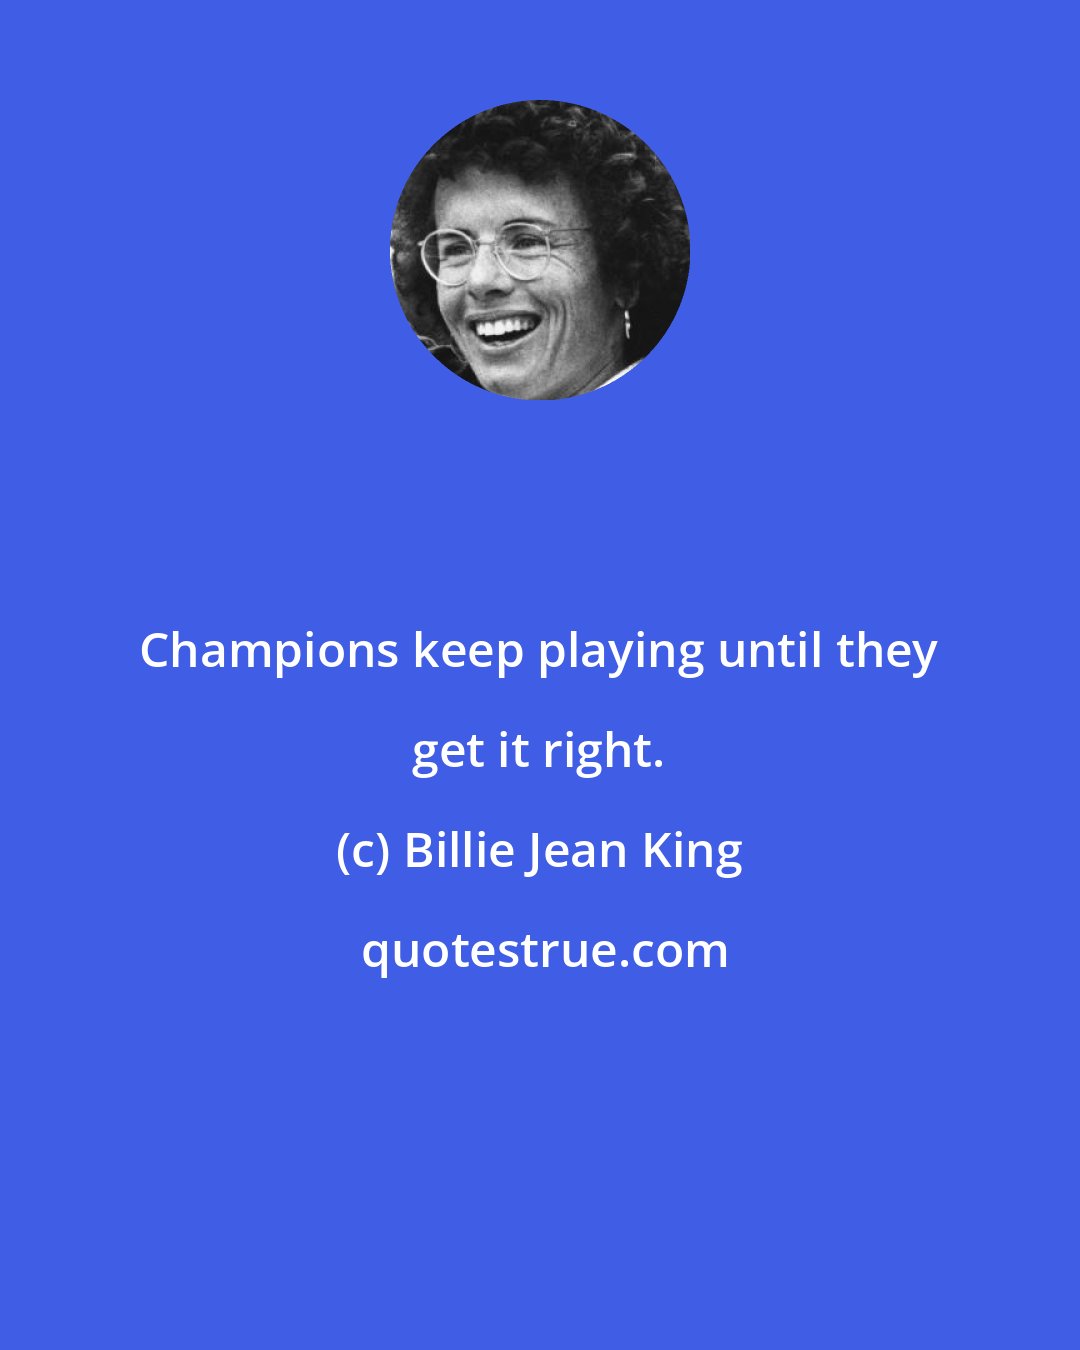 Billie Jean King: Champions keep playing until they get it right.